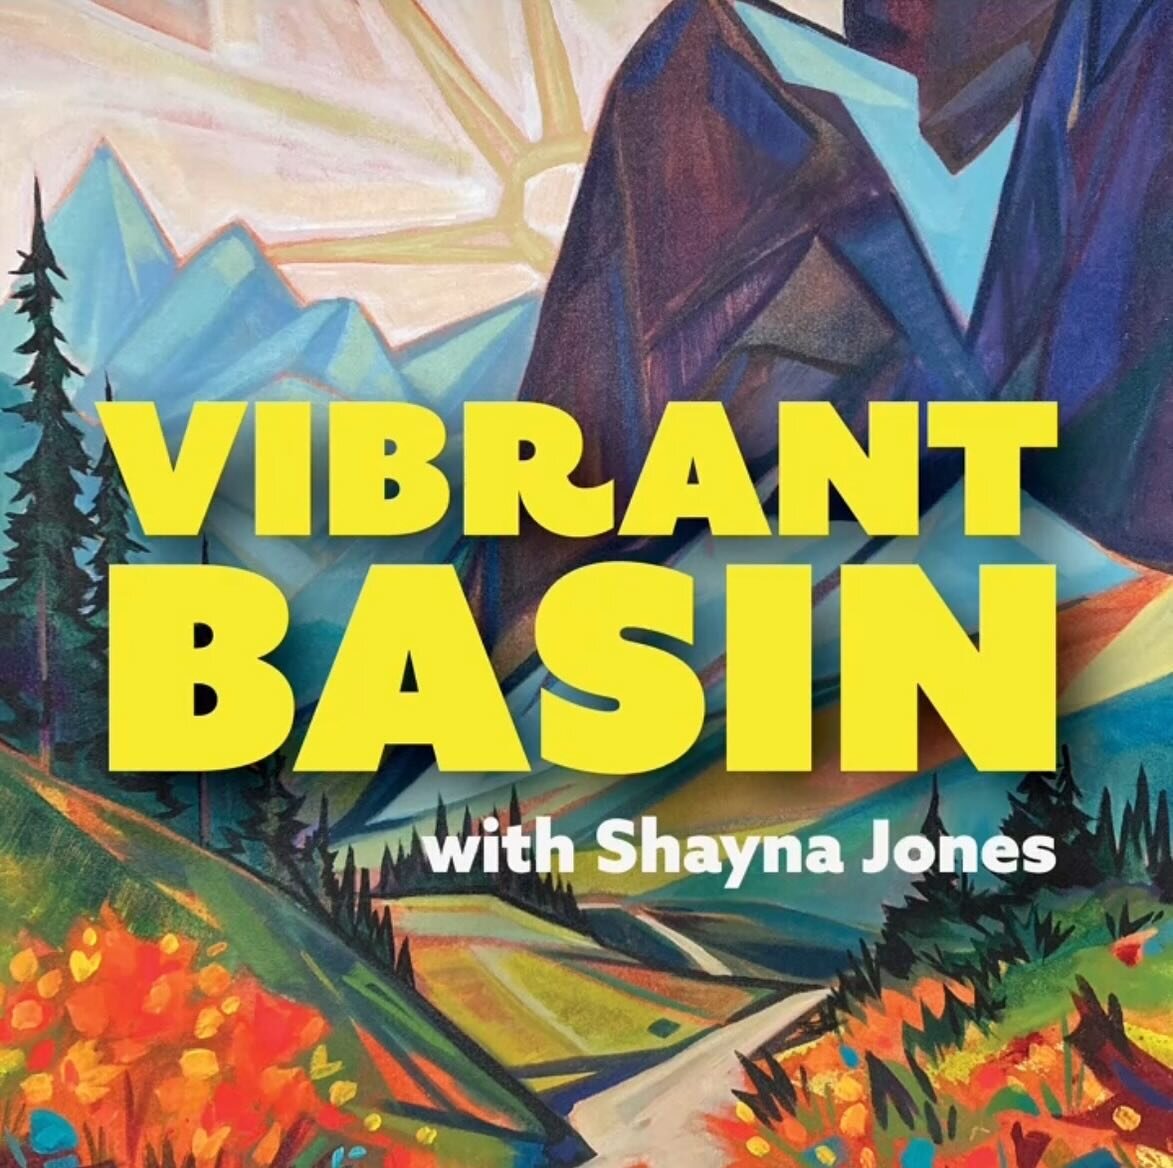 The Vibrant Basin podcast has been officially launched! This season asks guests &ldquo;how their artistic practices have shifted their understanding of themselves, their heritage, and their neighbours&rdquo;. 

I was delighted to collaborate with the